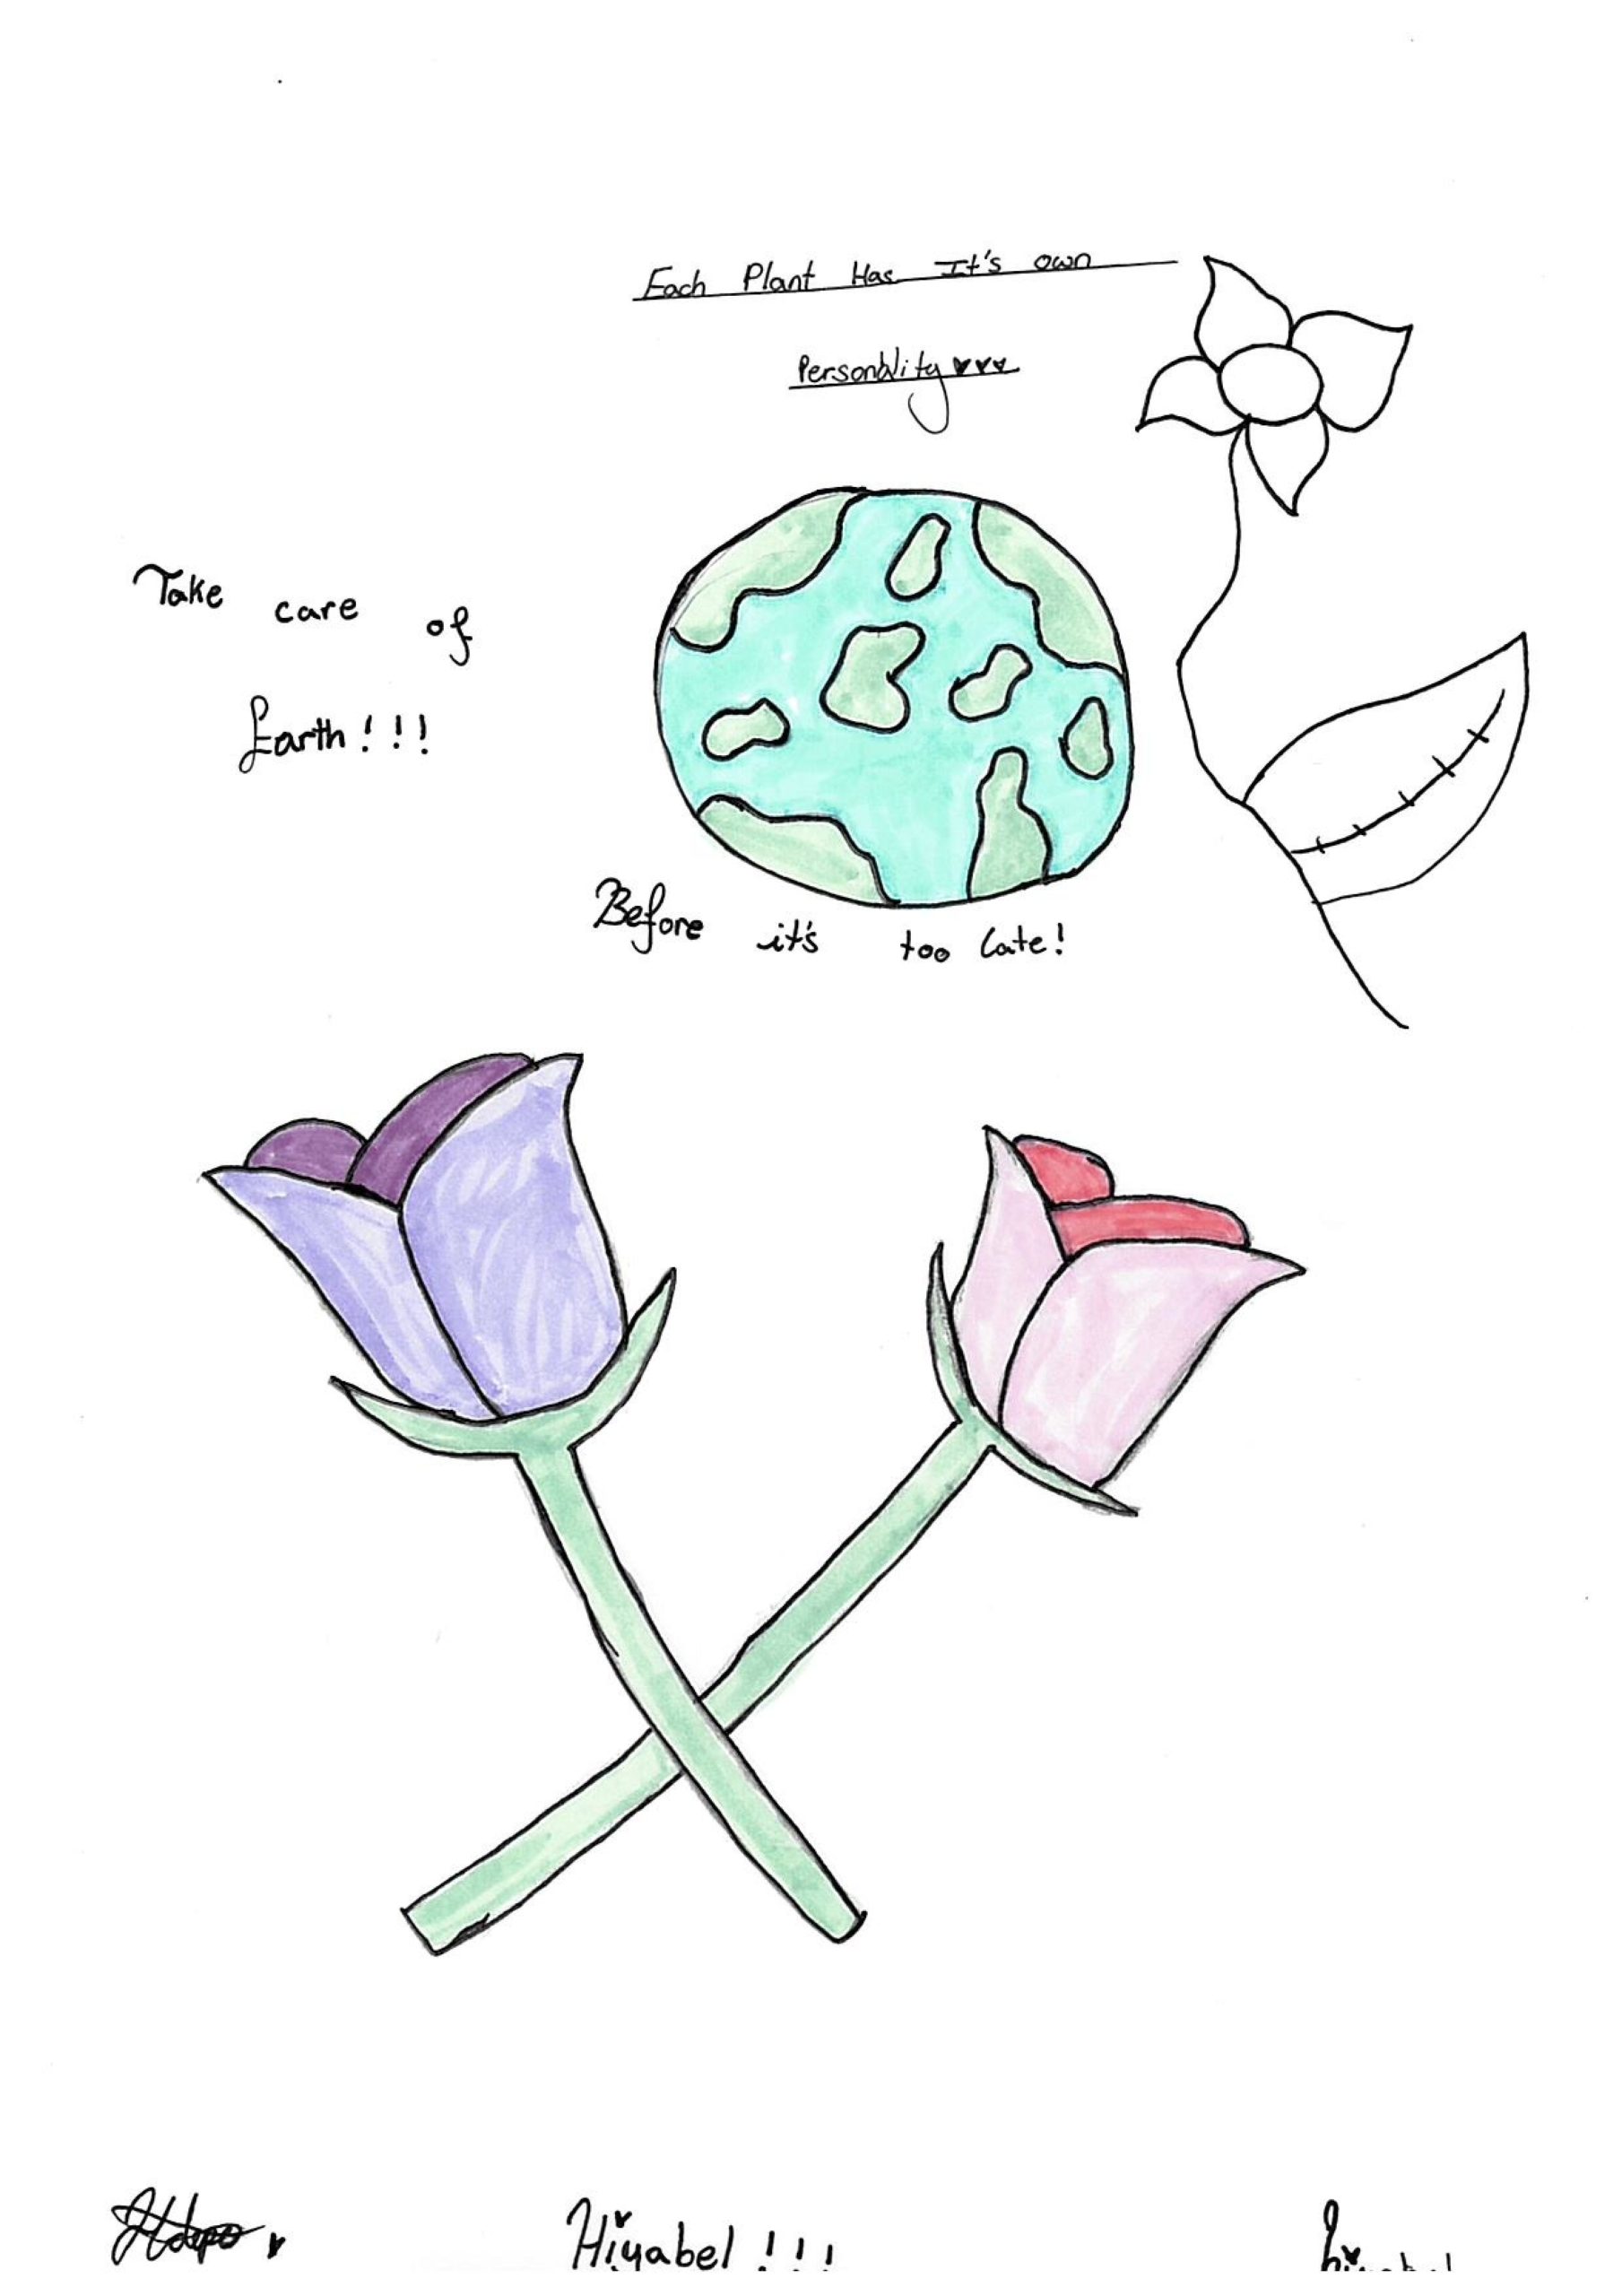 Image of hand-drawn flowers and planet earth. Handwritten text reads "Each plant has it's own personality. Take care of Earth! Before it's too late!" by Hiyabel